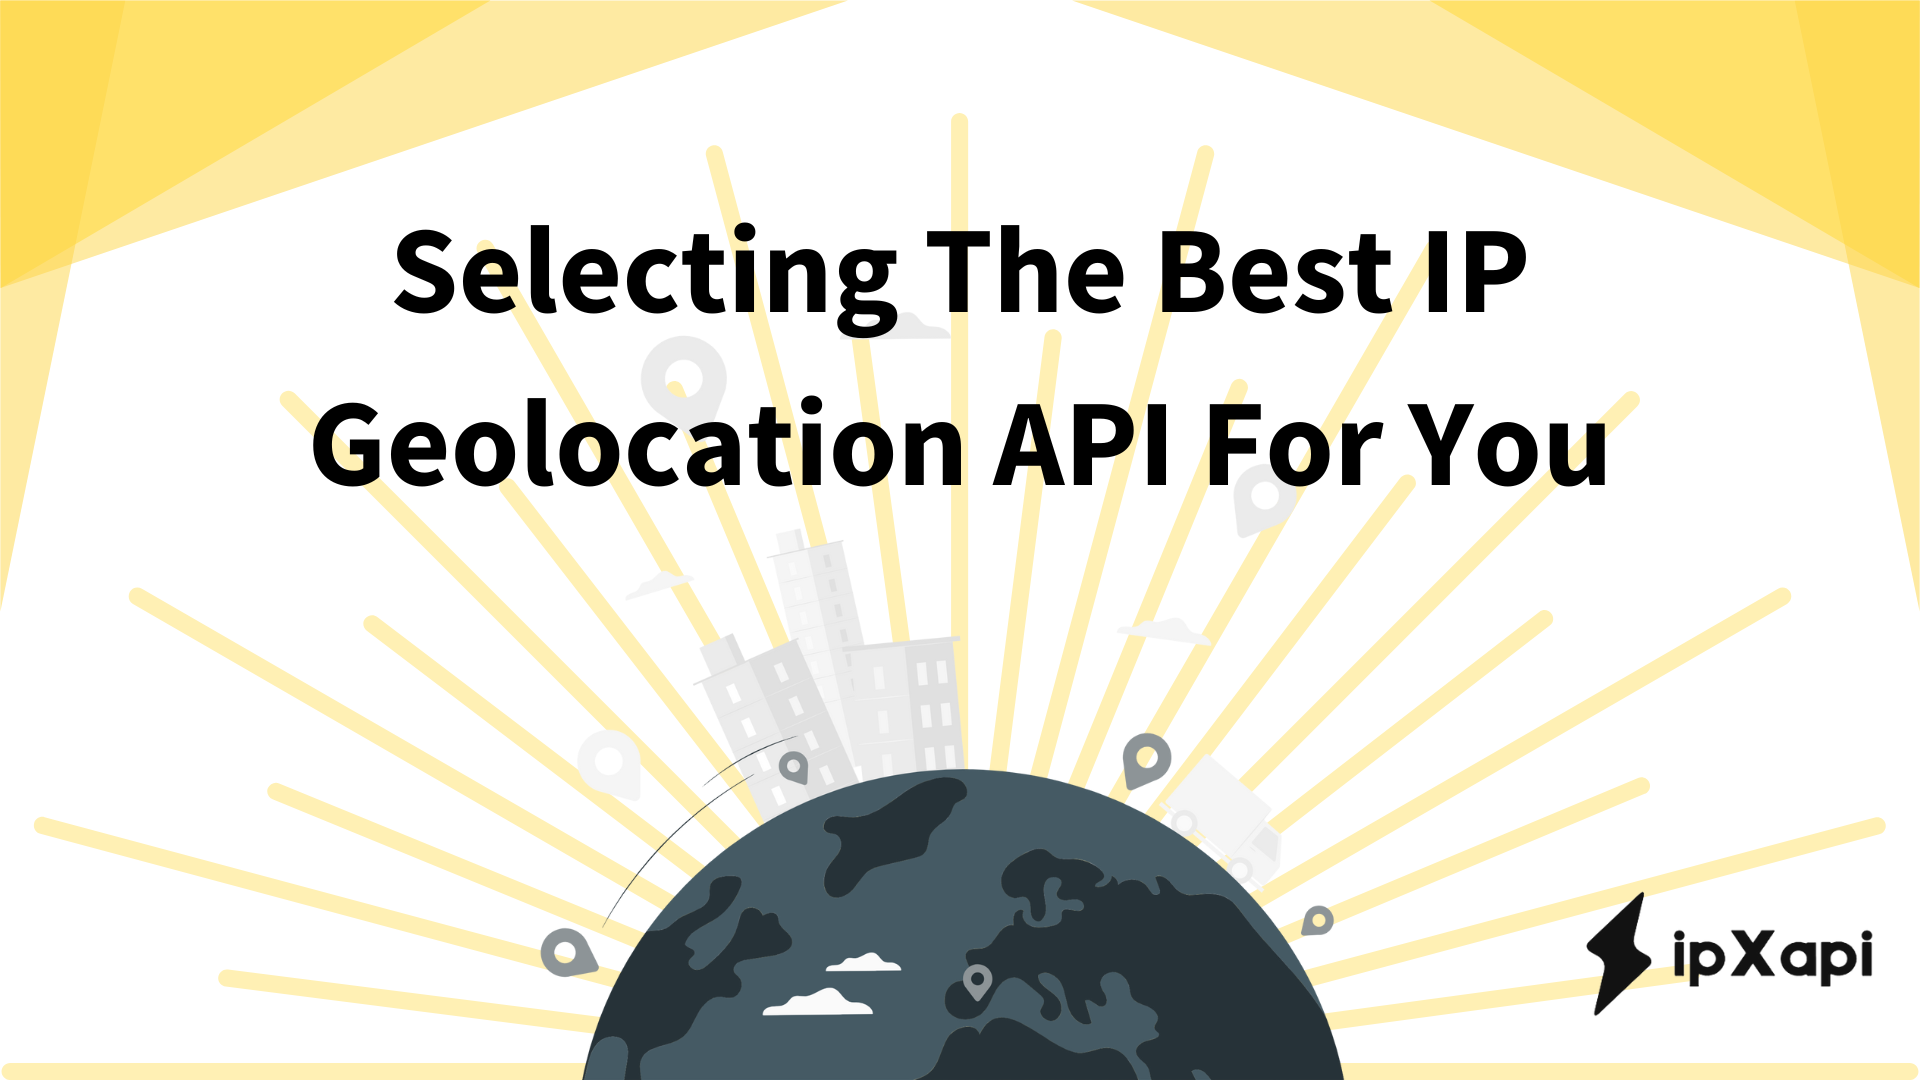 Selecting The Best IP Geolocation API For You